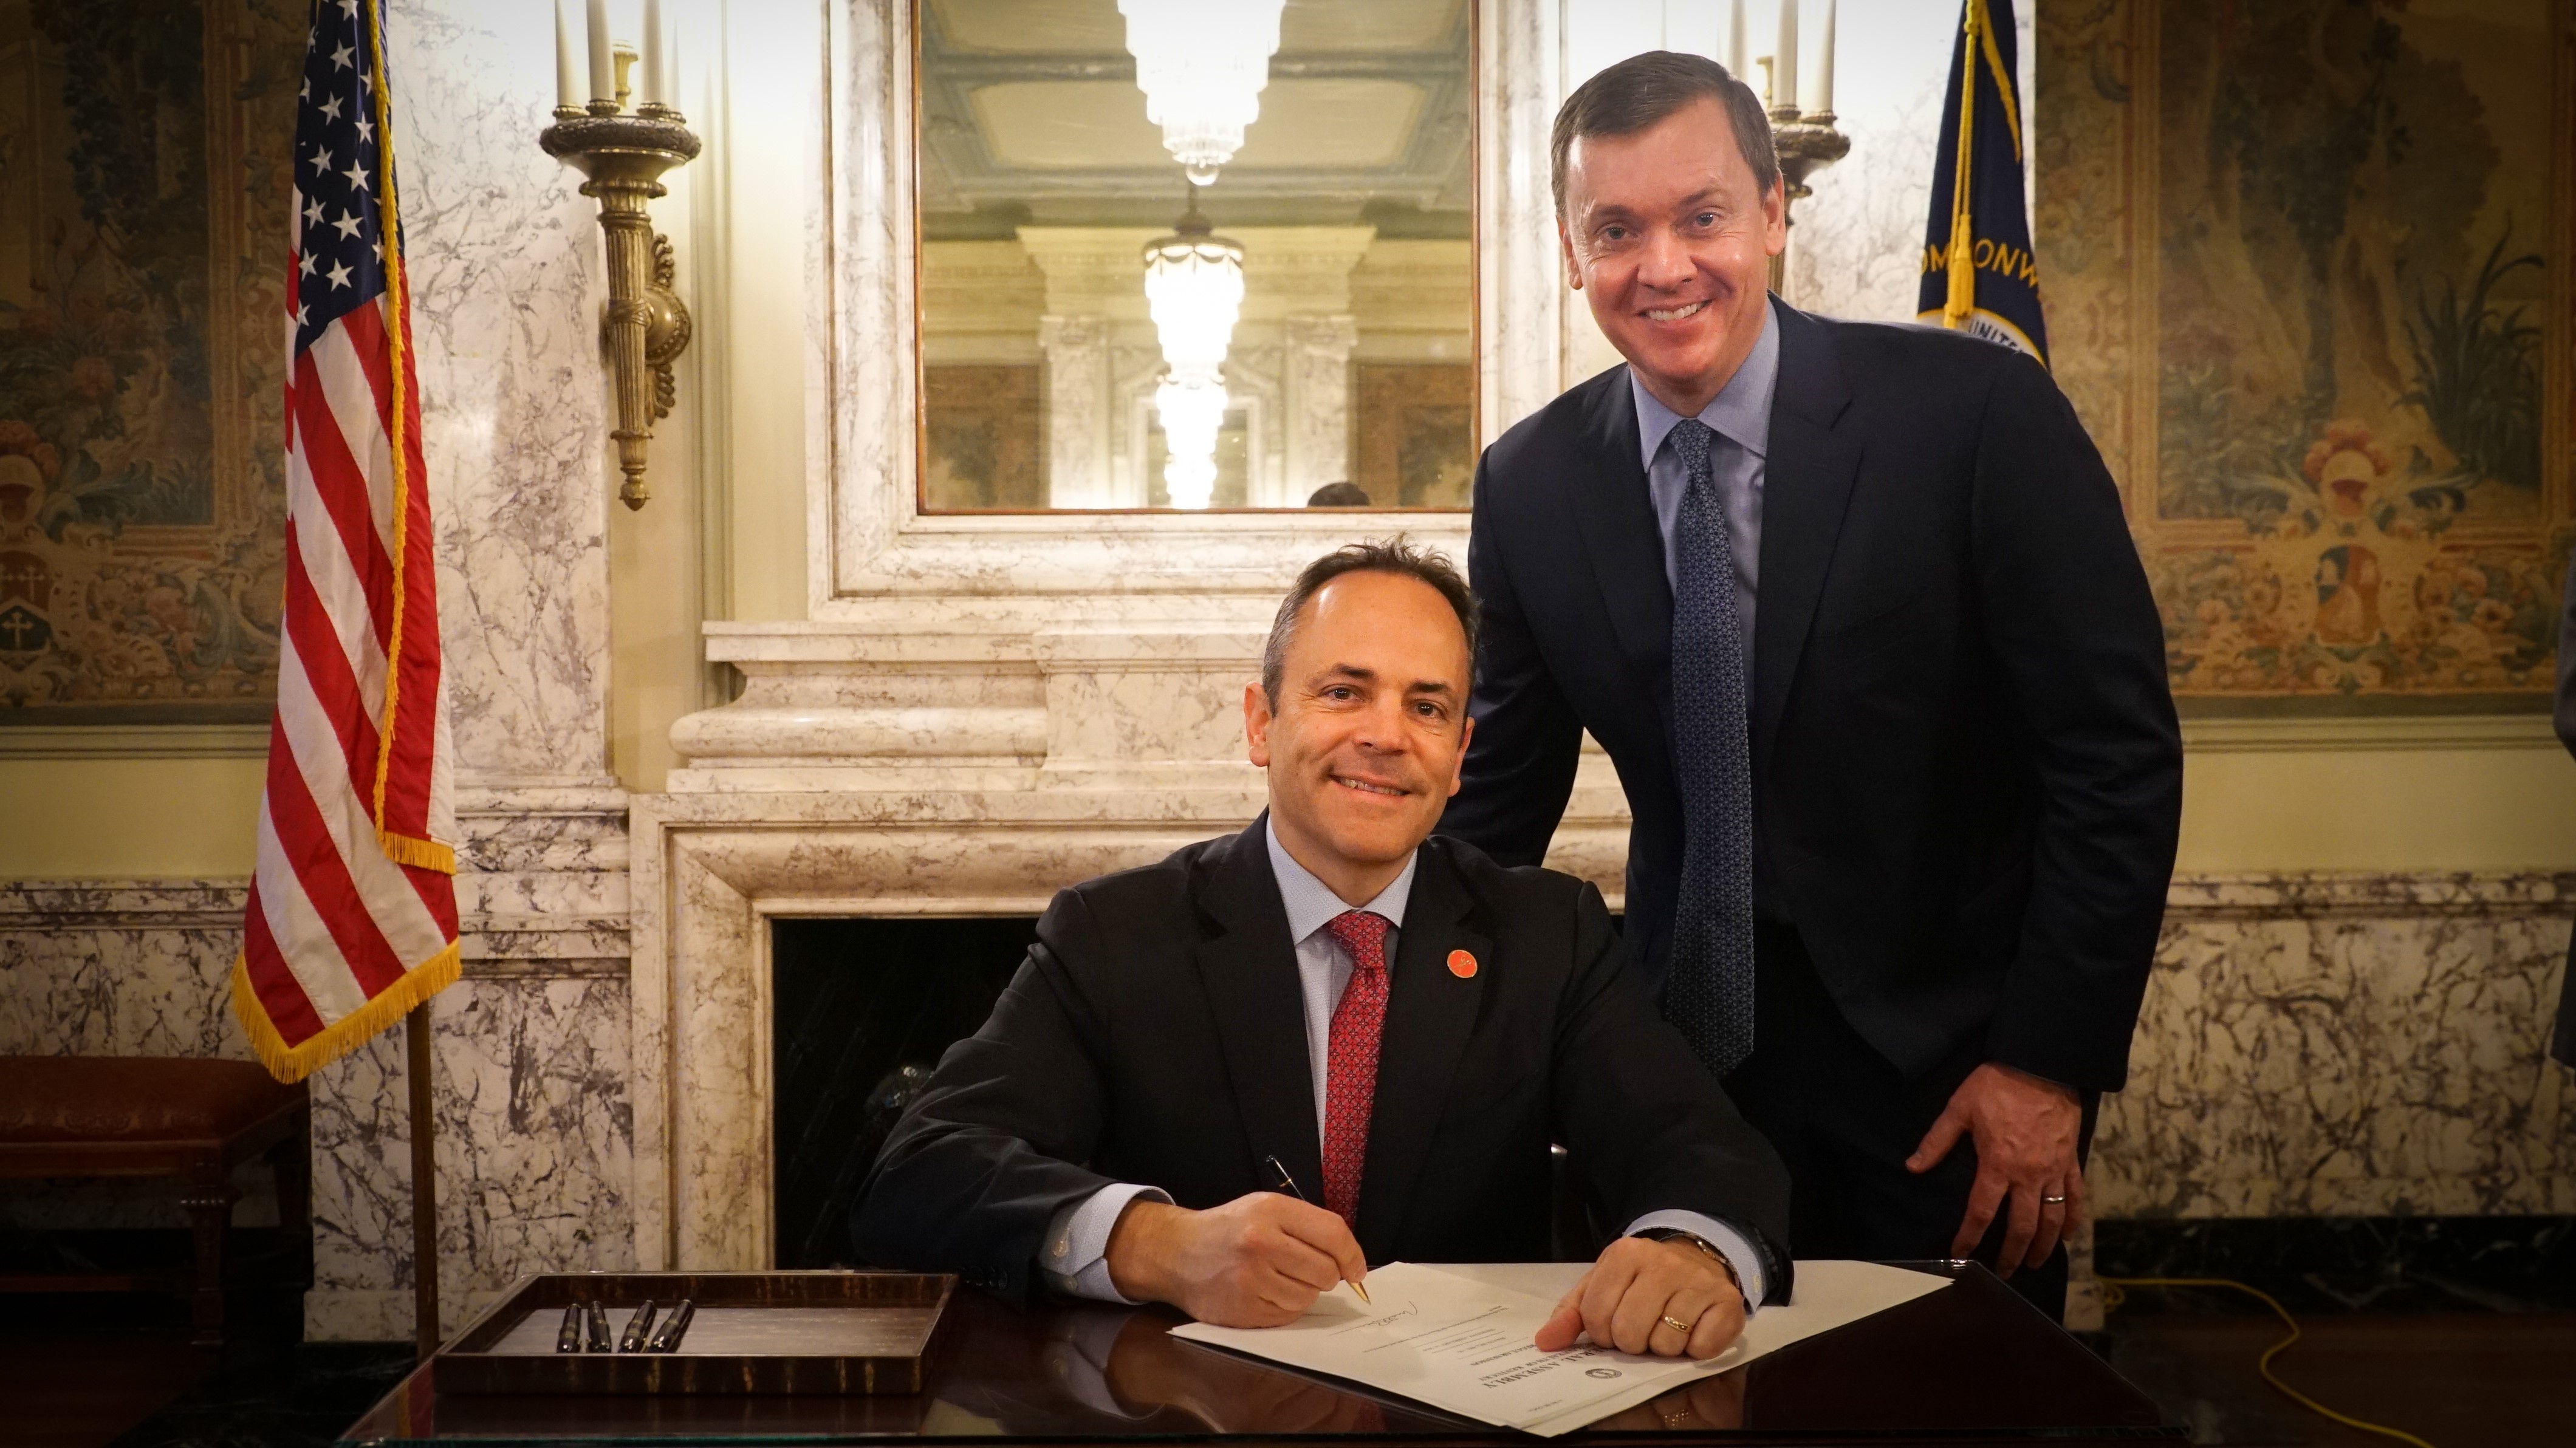 NRA-ILA Executive Director Chris Cox Meets with Governor Bevin in Kentucky